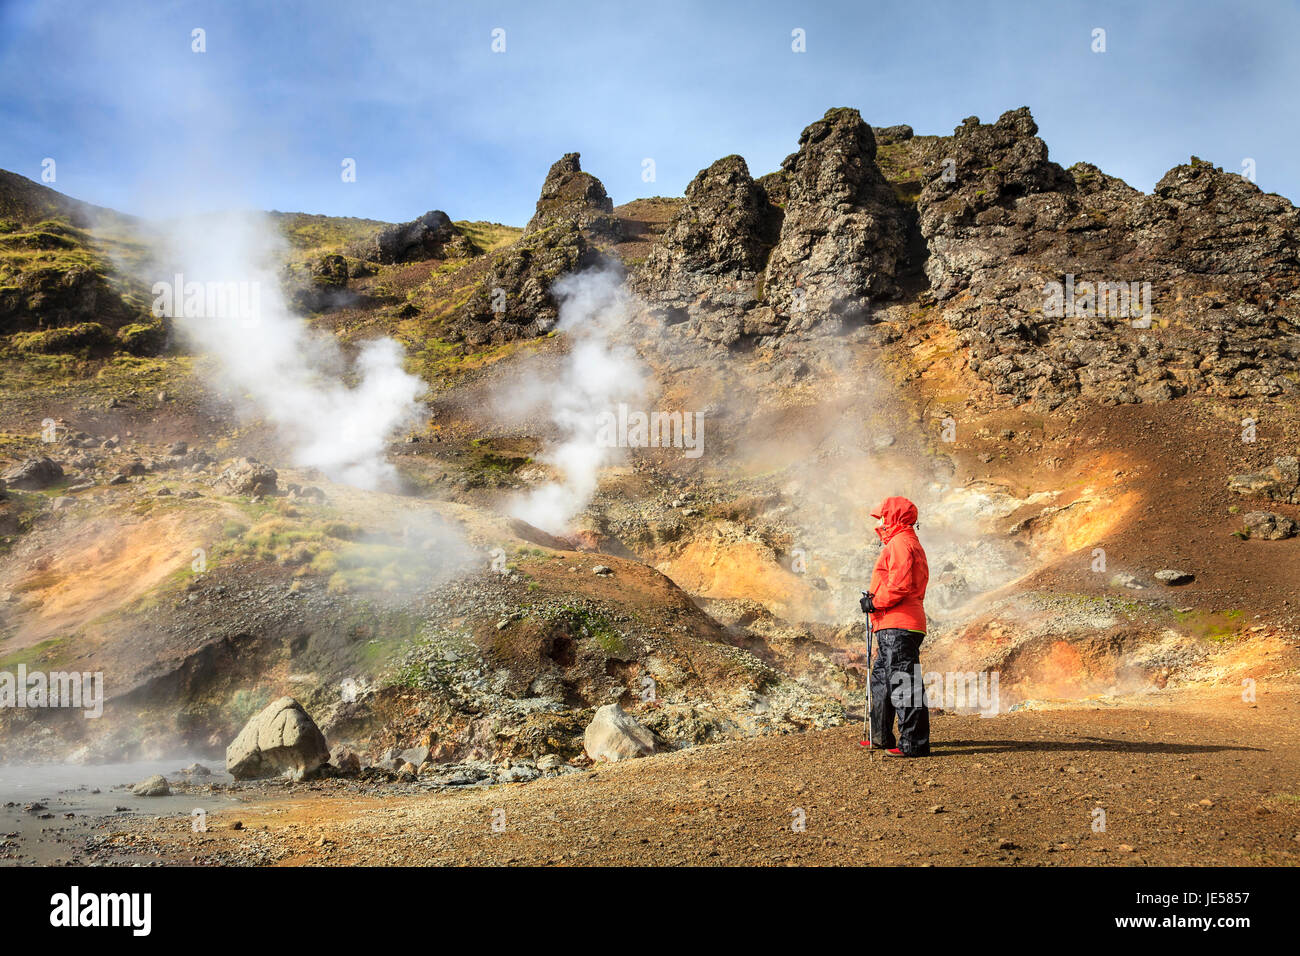 Boiling water and mud in the Reykjadalur valley in South Iceland Stock Photo